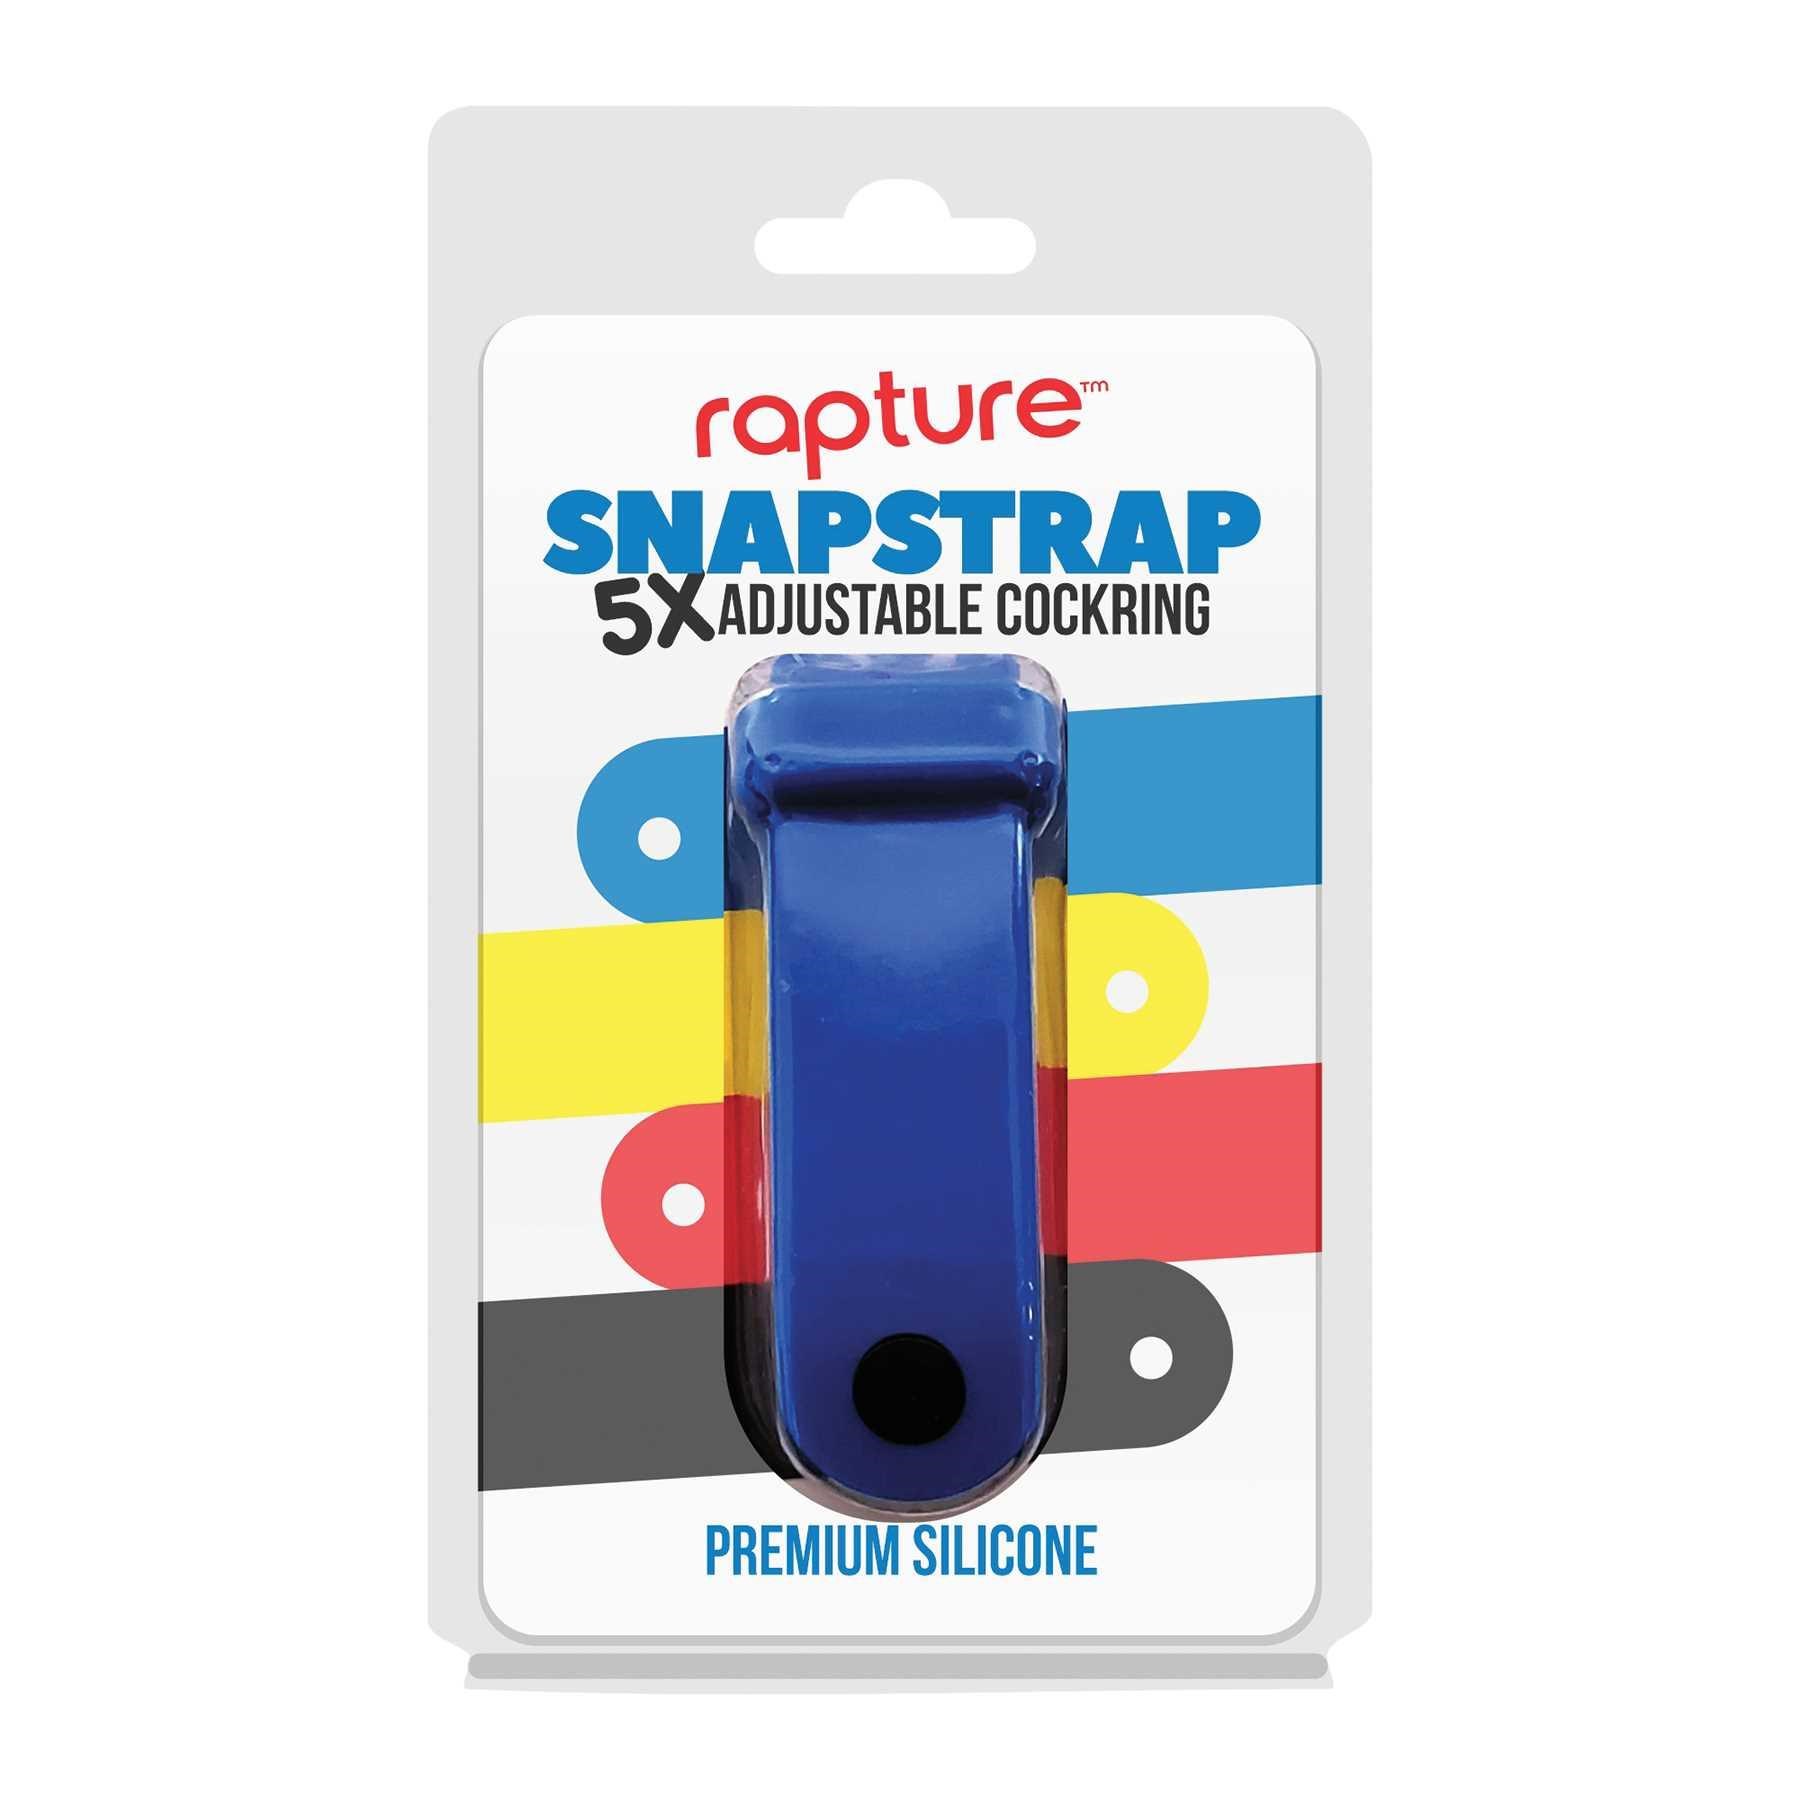 SNAPSTRAP 5X SILICONE COCKRING front of packaging